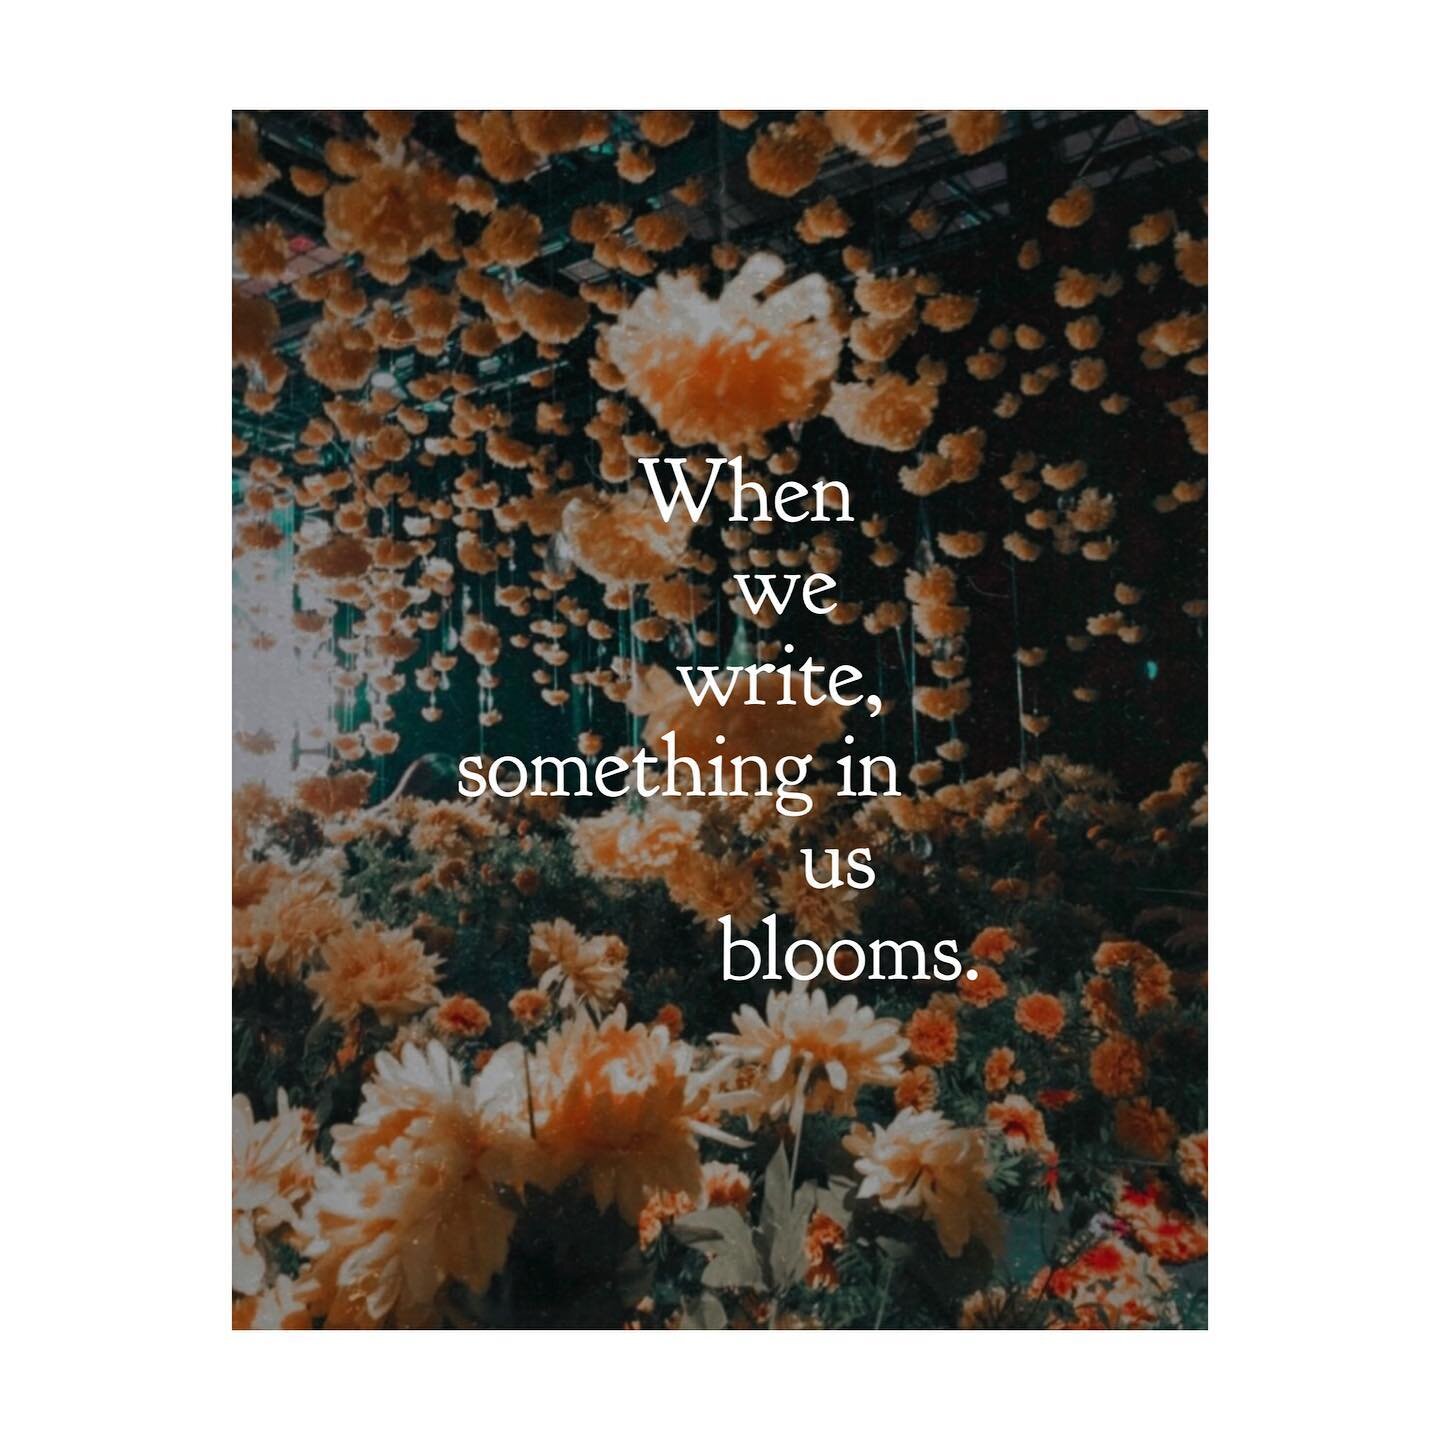 Come bloom with us.🌻

Join #writeyourheartout today at 2pm EST - today we are exploring self-compassion through #presence.

Tap the link in bio to sign up for Are &amp; Be&rsquo;s newsletter and get updates on upcoming workshops and collabs.

Intere